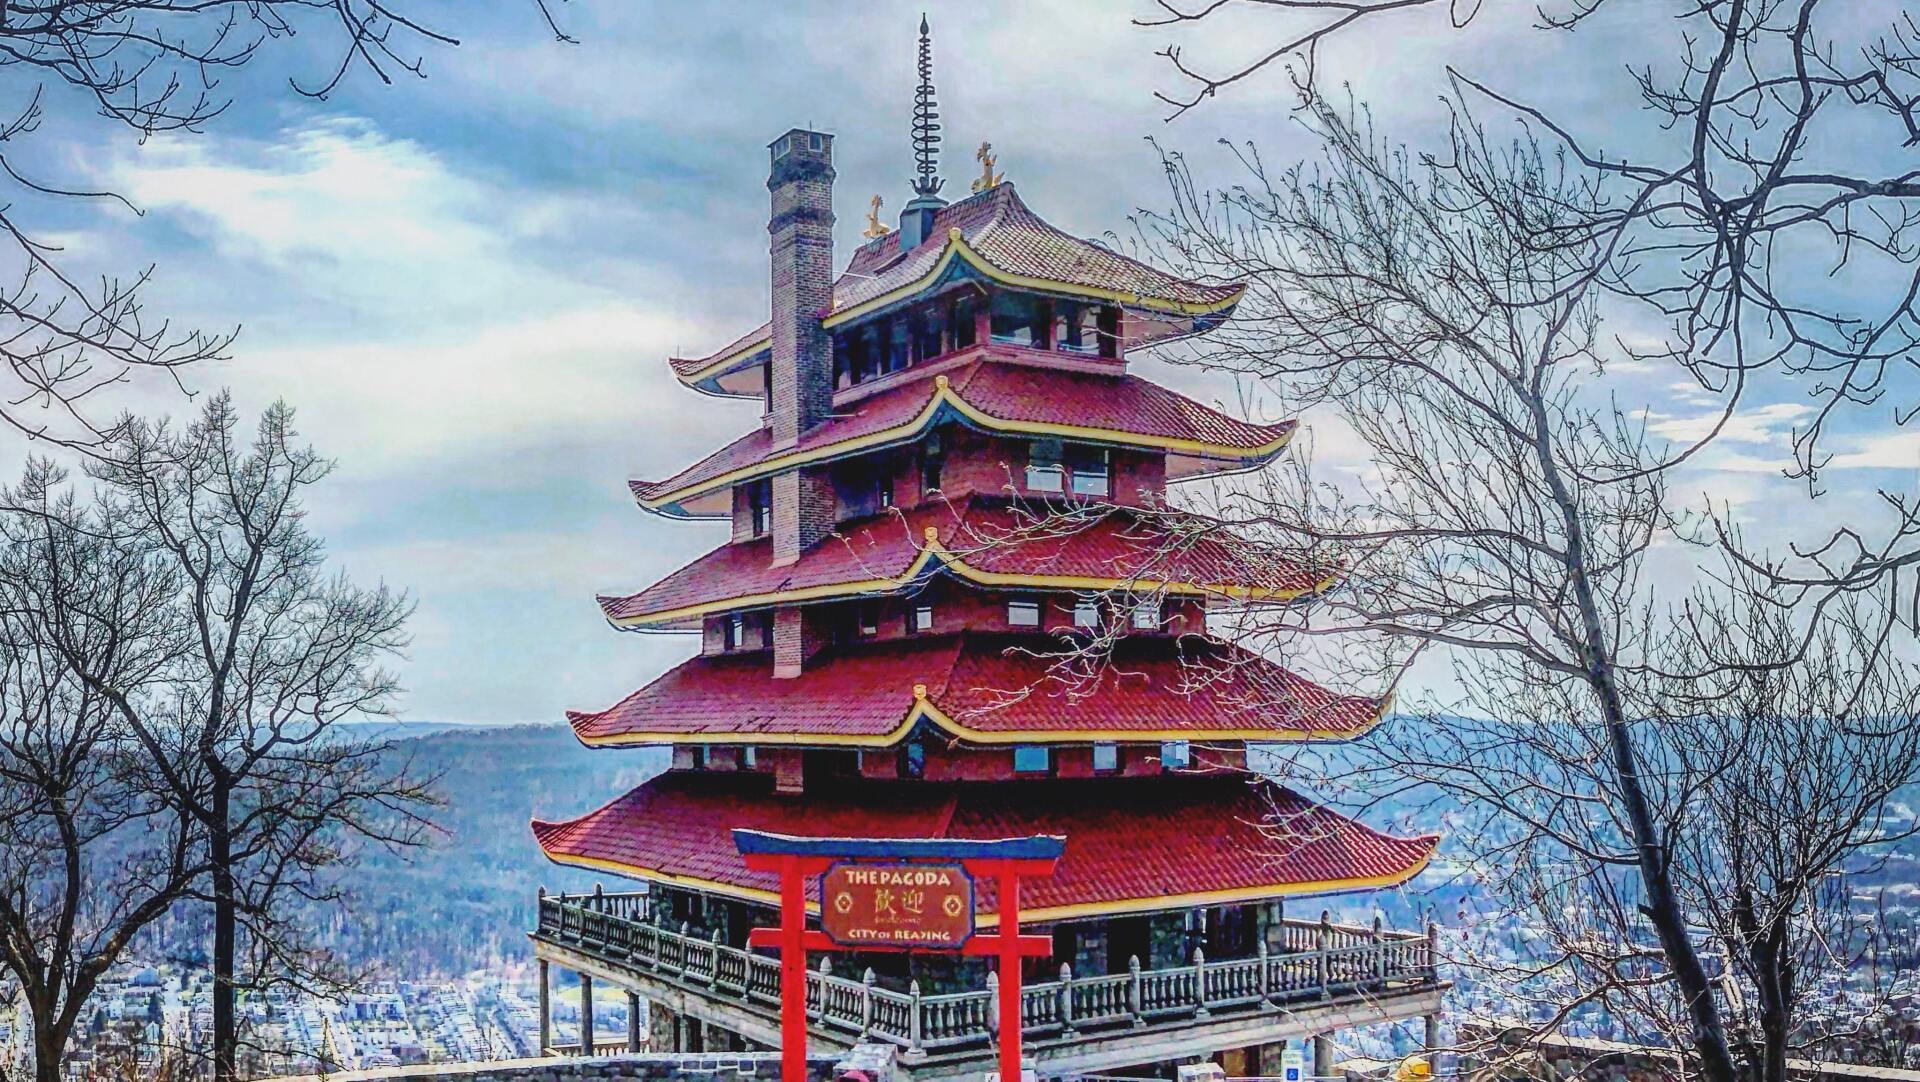 A painting of a pagoda surrounded by trees and a body of water.